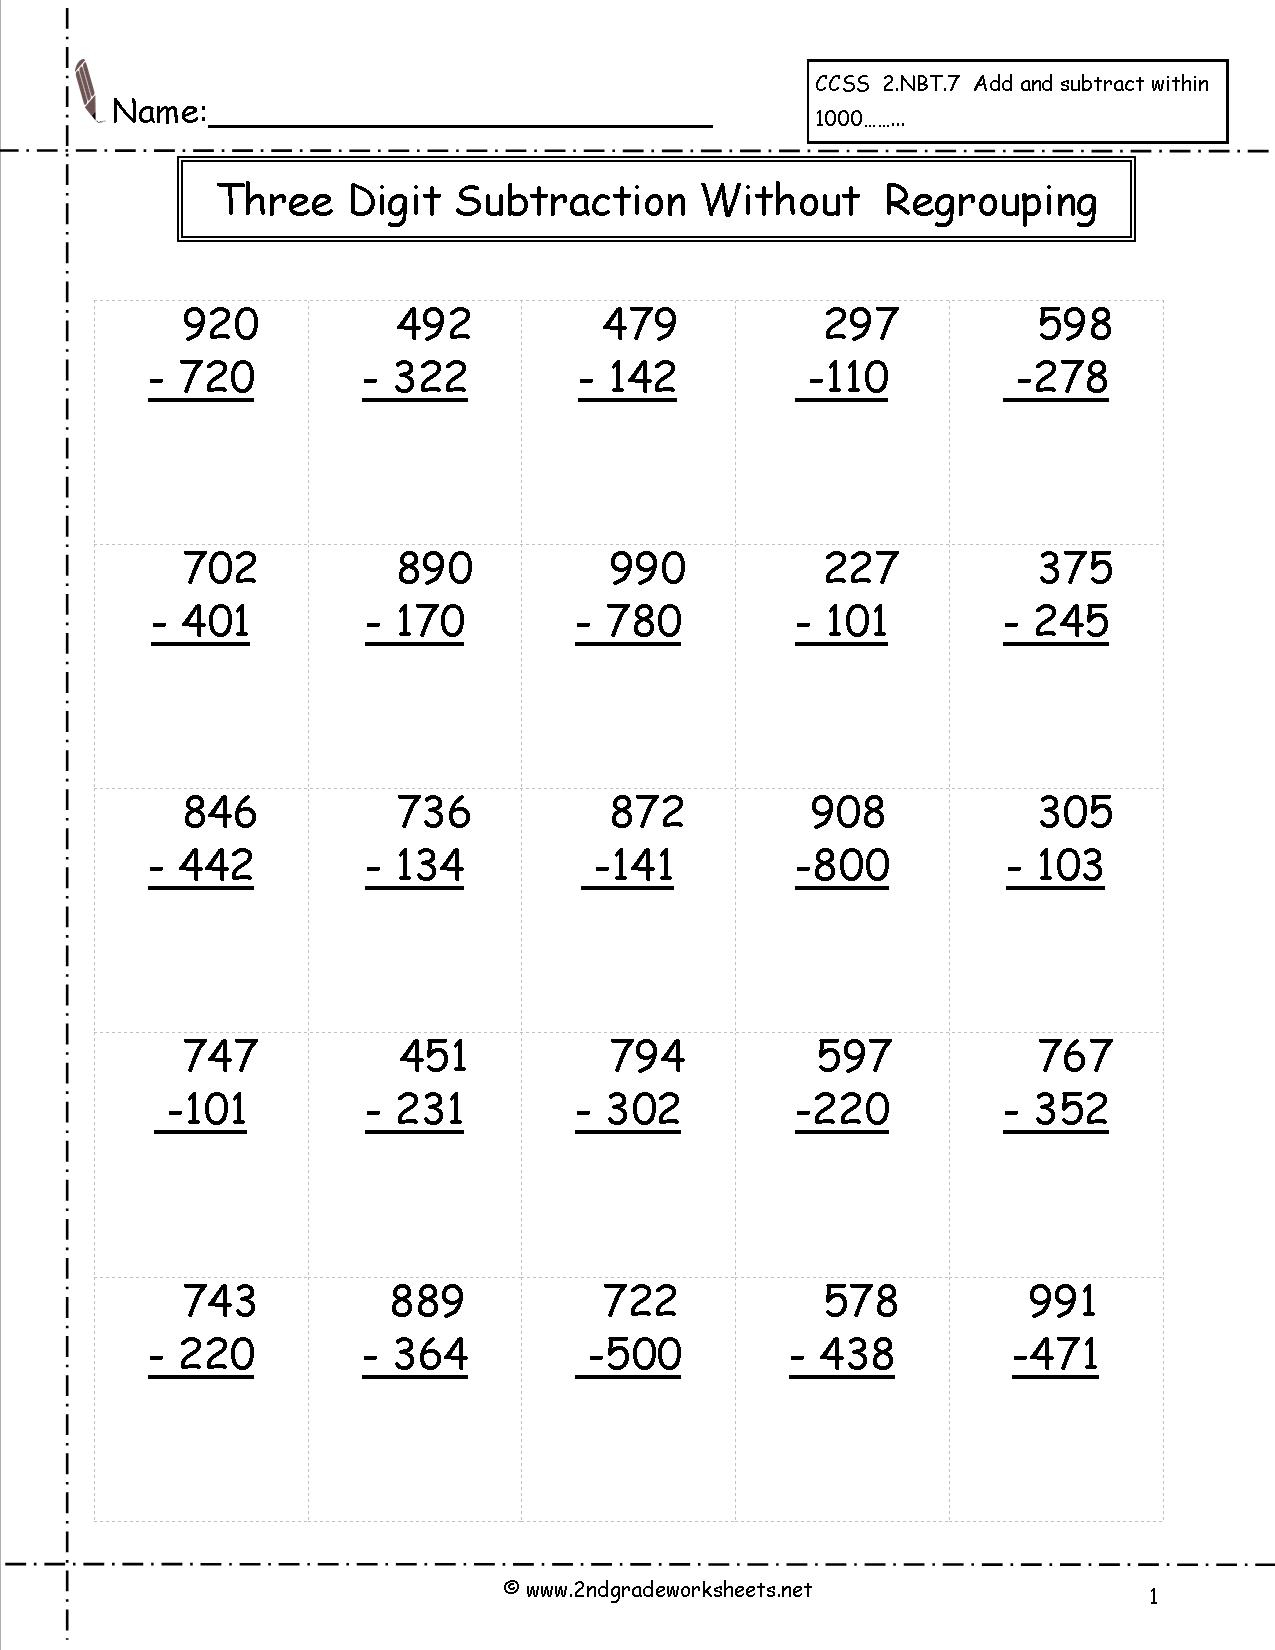 Three Digit Subtraction Worksheets - Free Printable 3 Digit Subtraction With Regrouping Worksheets